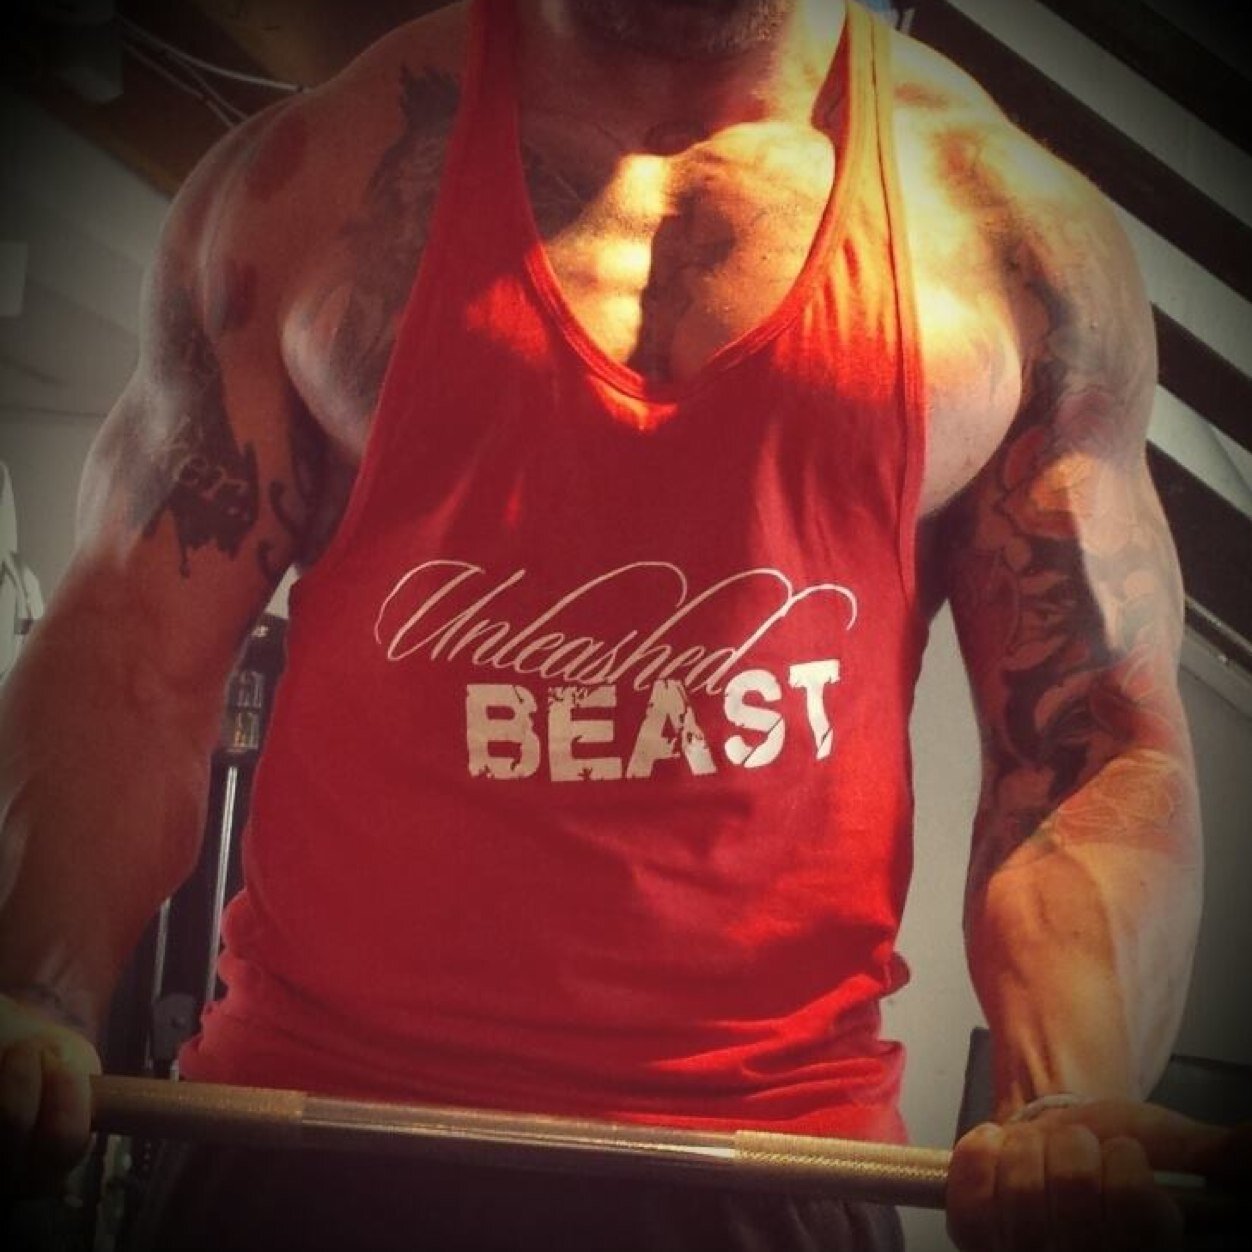 High Quality and Tailored Gym & Leisure Wear Brand for the serious trainer! #TeamUB #UBGymWear #UnleashedBeast